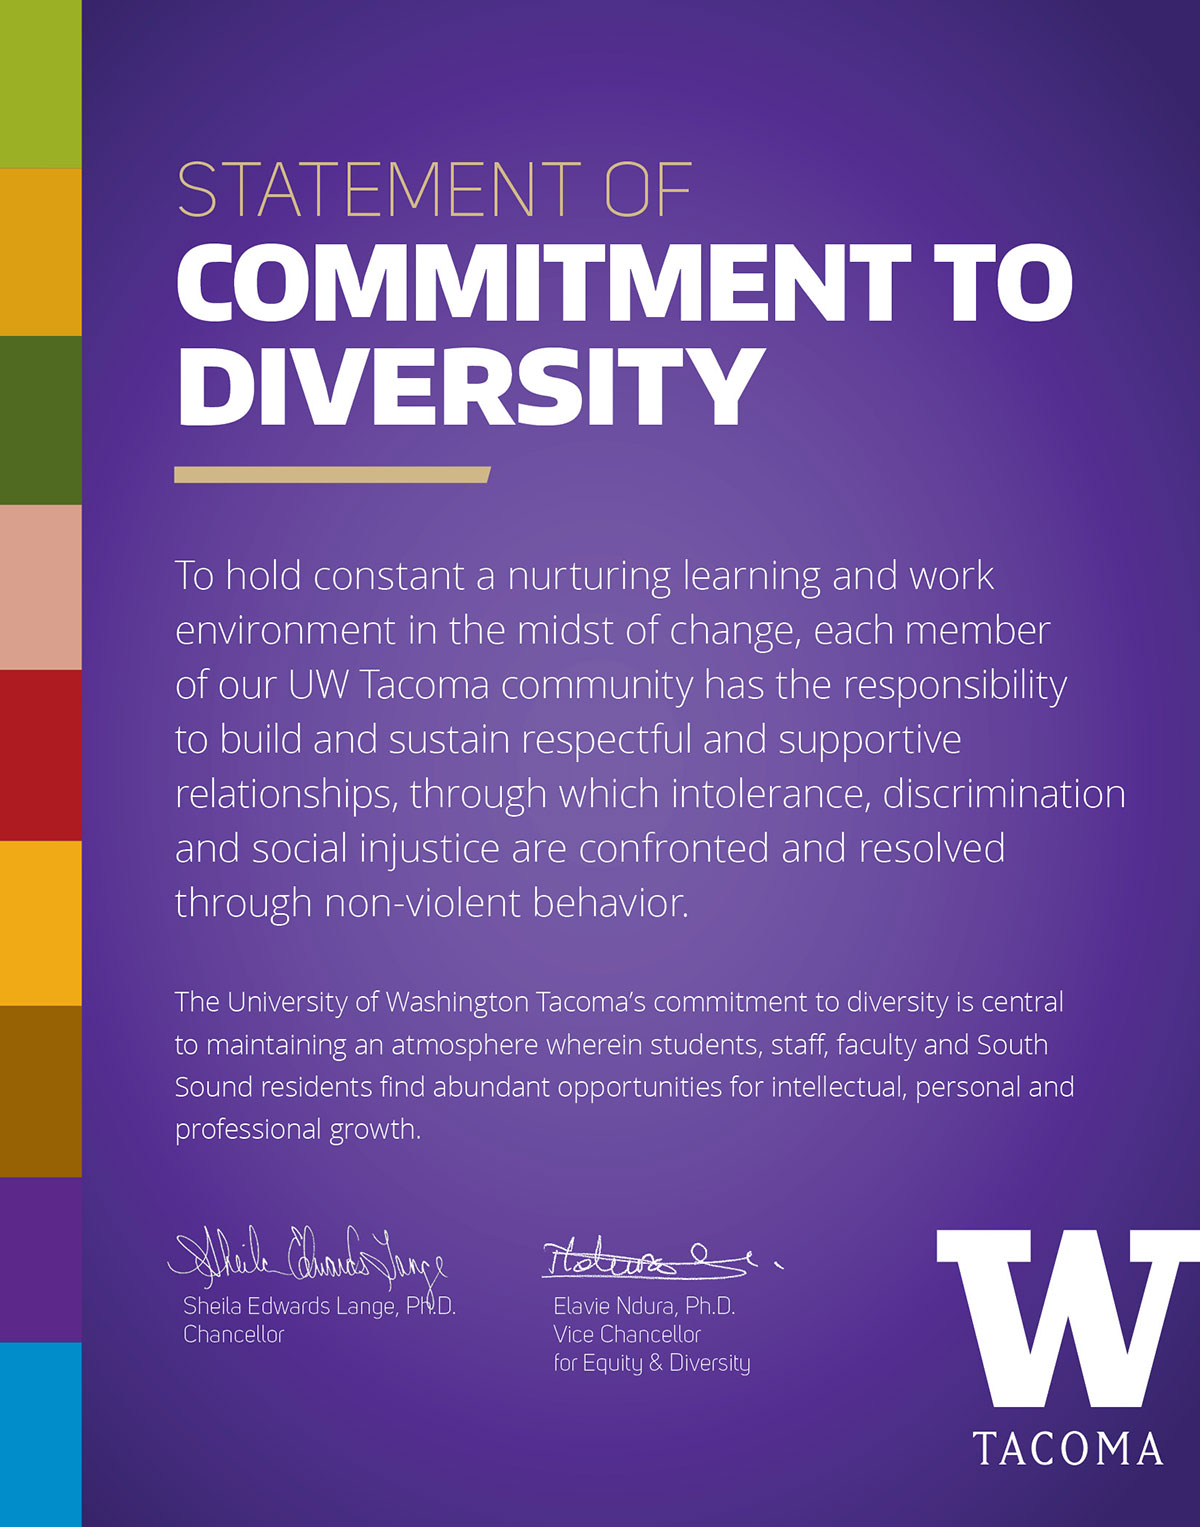 Statement of Commitment to Diversity